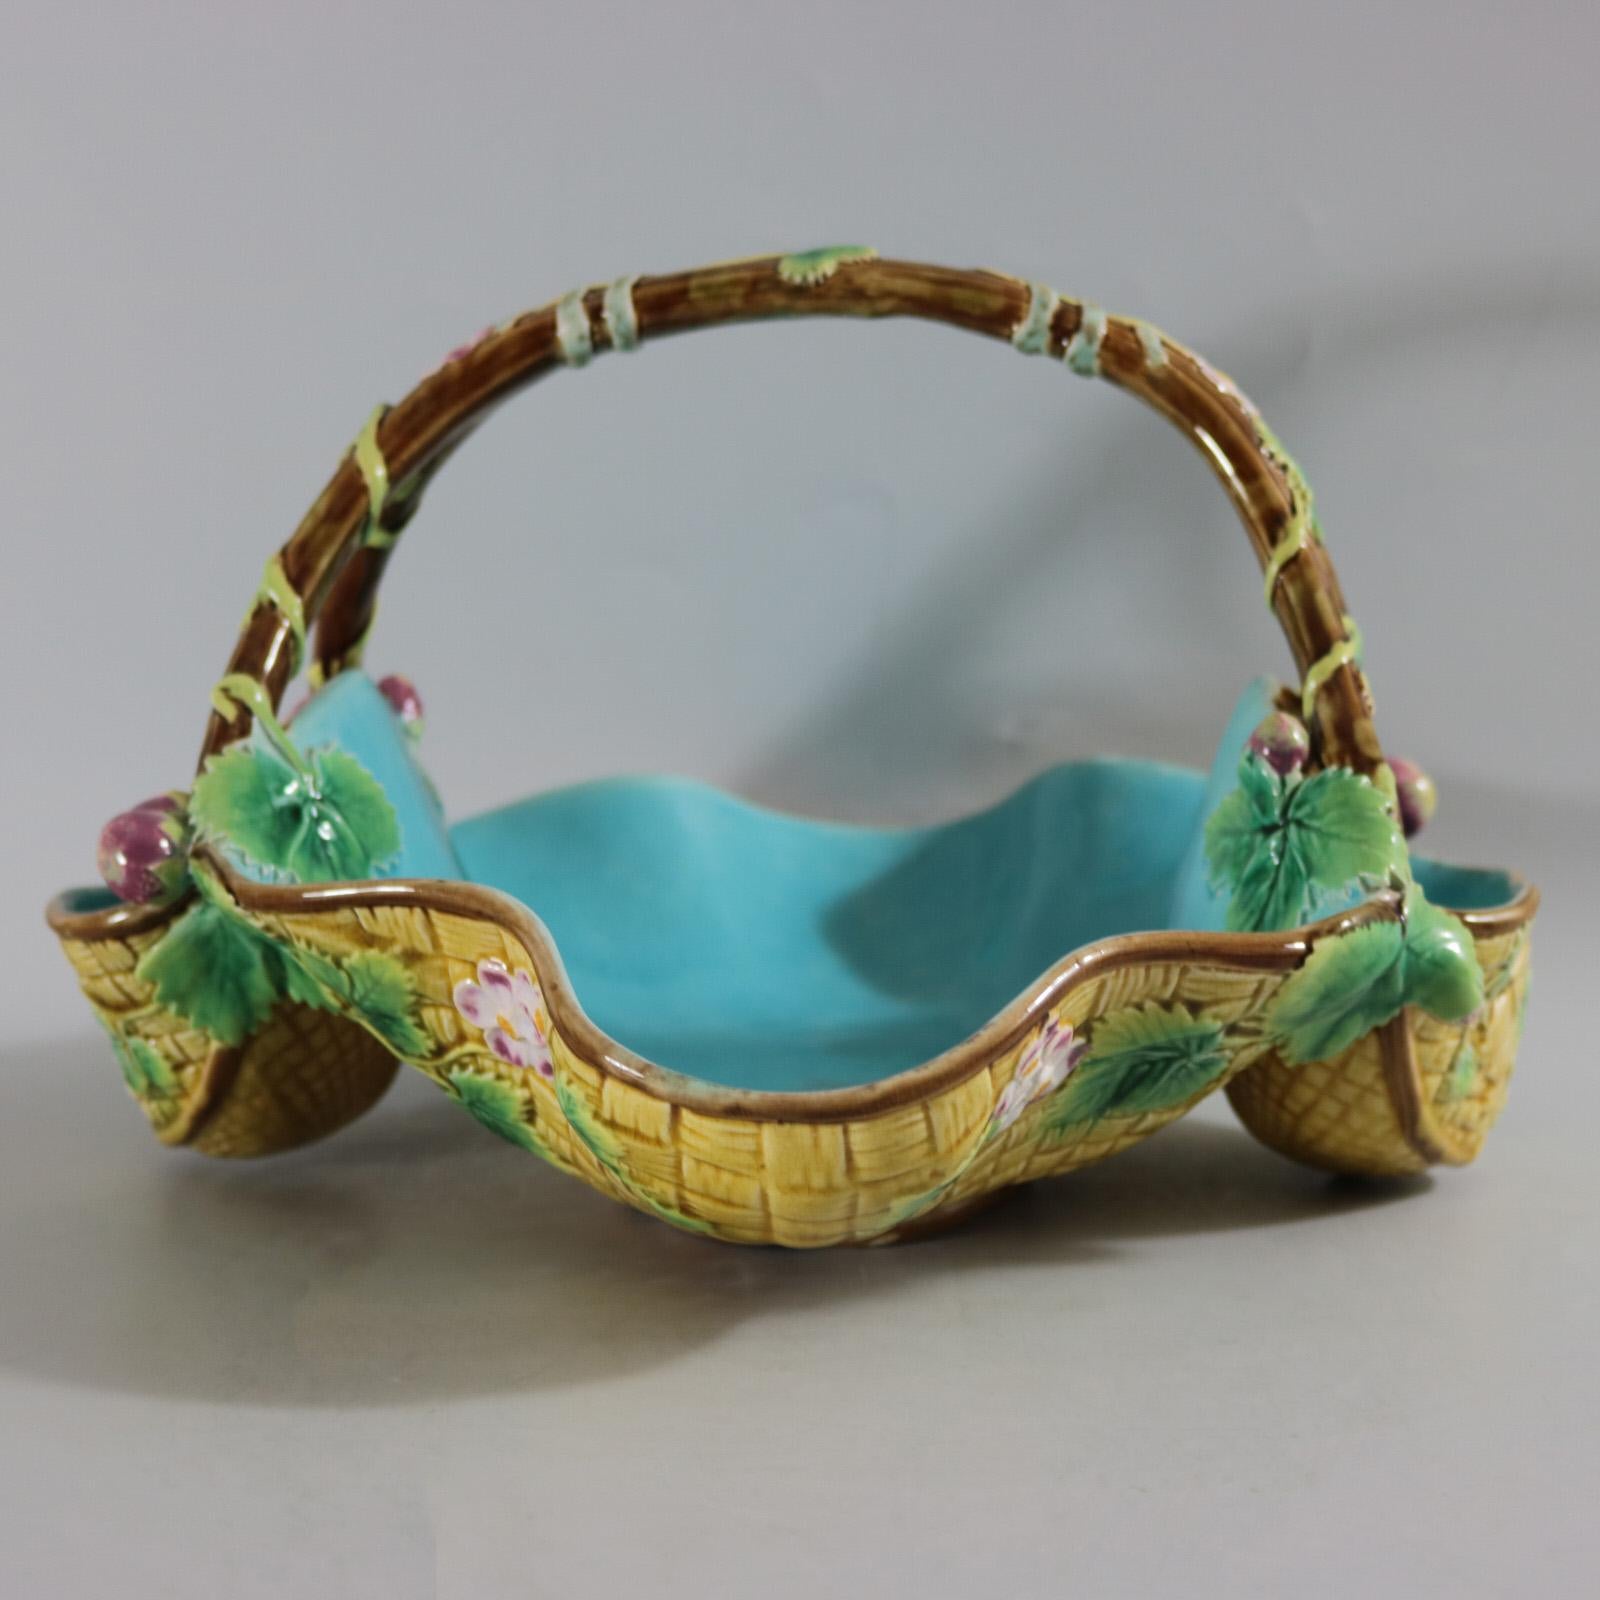 George Jones Majolica basket which features yellow woven basket sides and a branch handle. Embellished all over with strawberry leaves, flowers and fruit. Colouration: turquoise, yellow, green, are predominant. Bears a pattern number, '5276'.